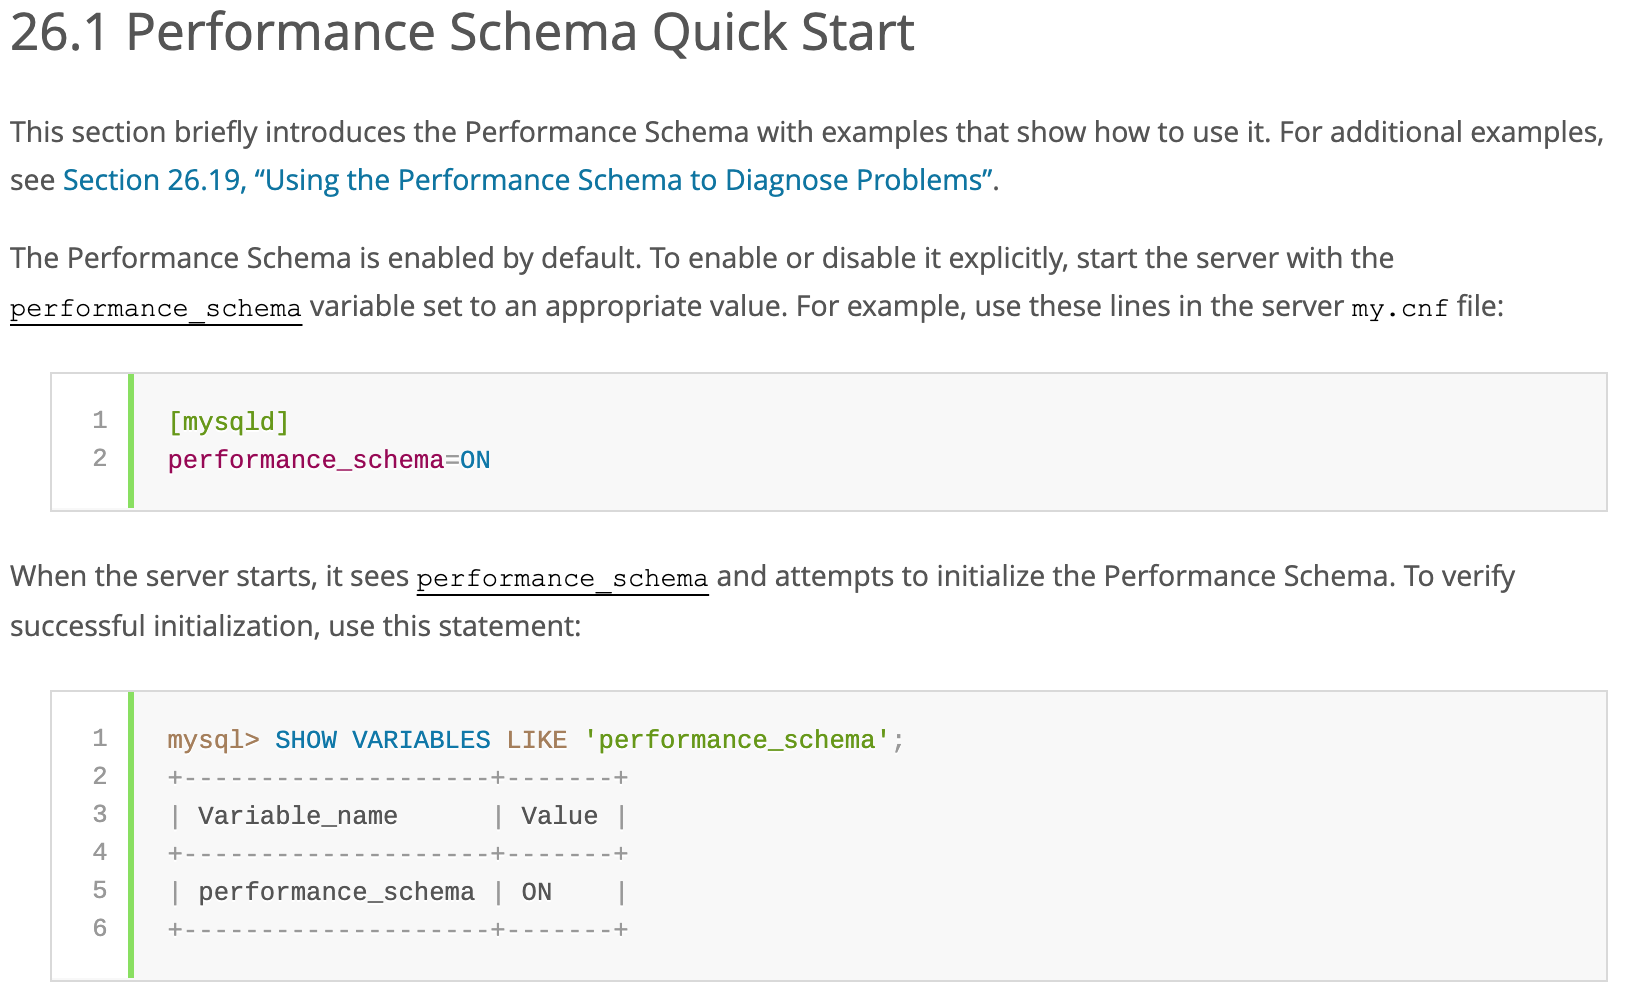 This section briefly introduces the Performance Schema with examples that show how to use it.